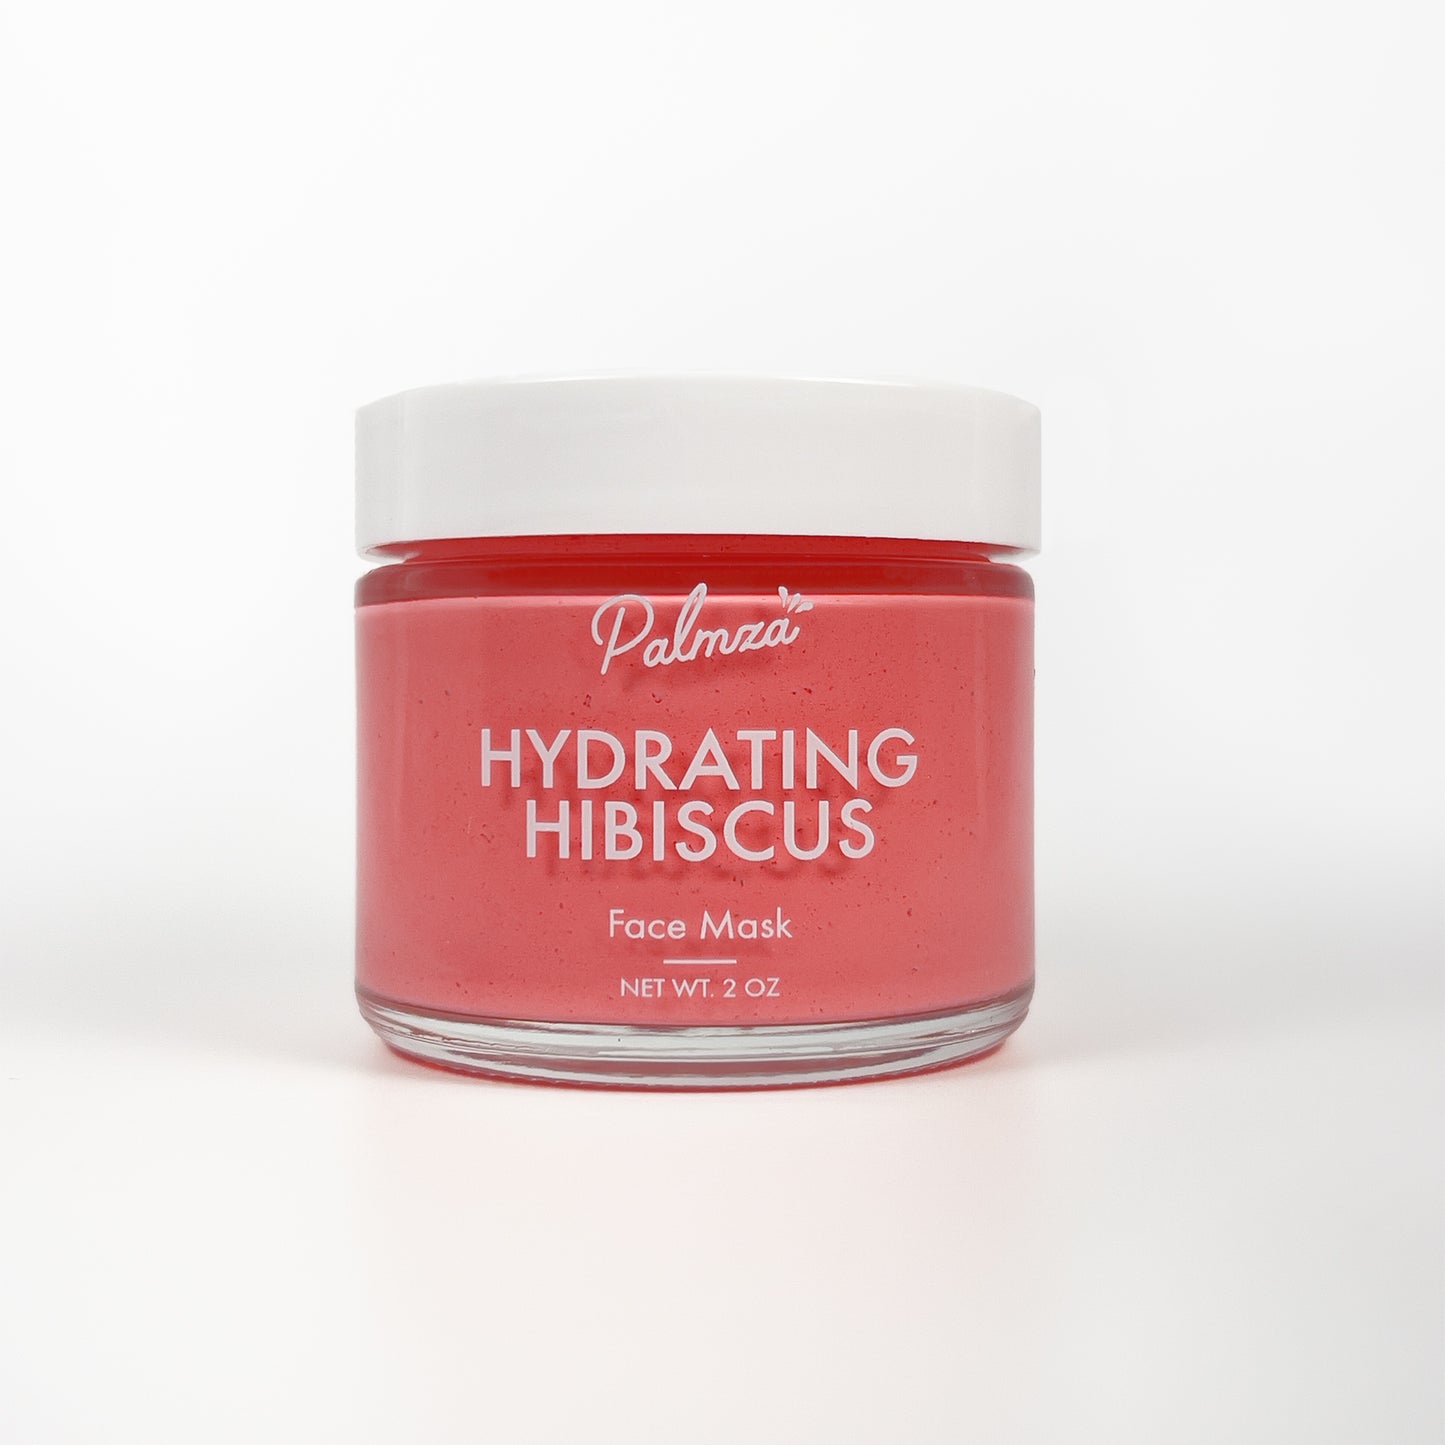 Hydrating Hibiscus Face Mask